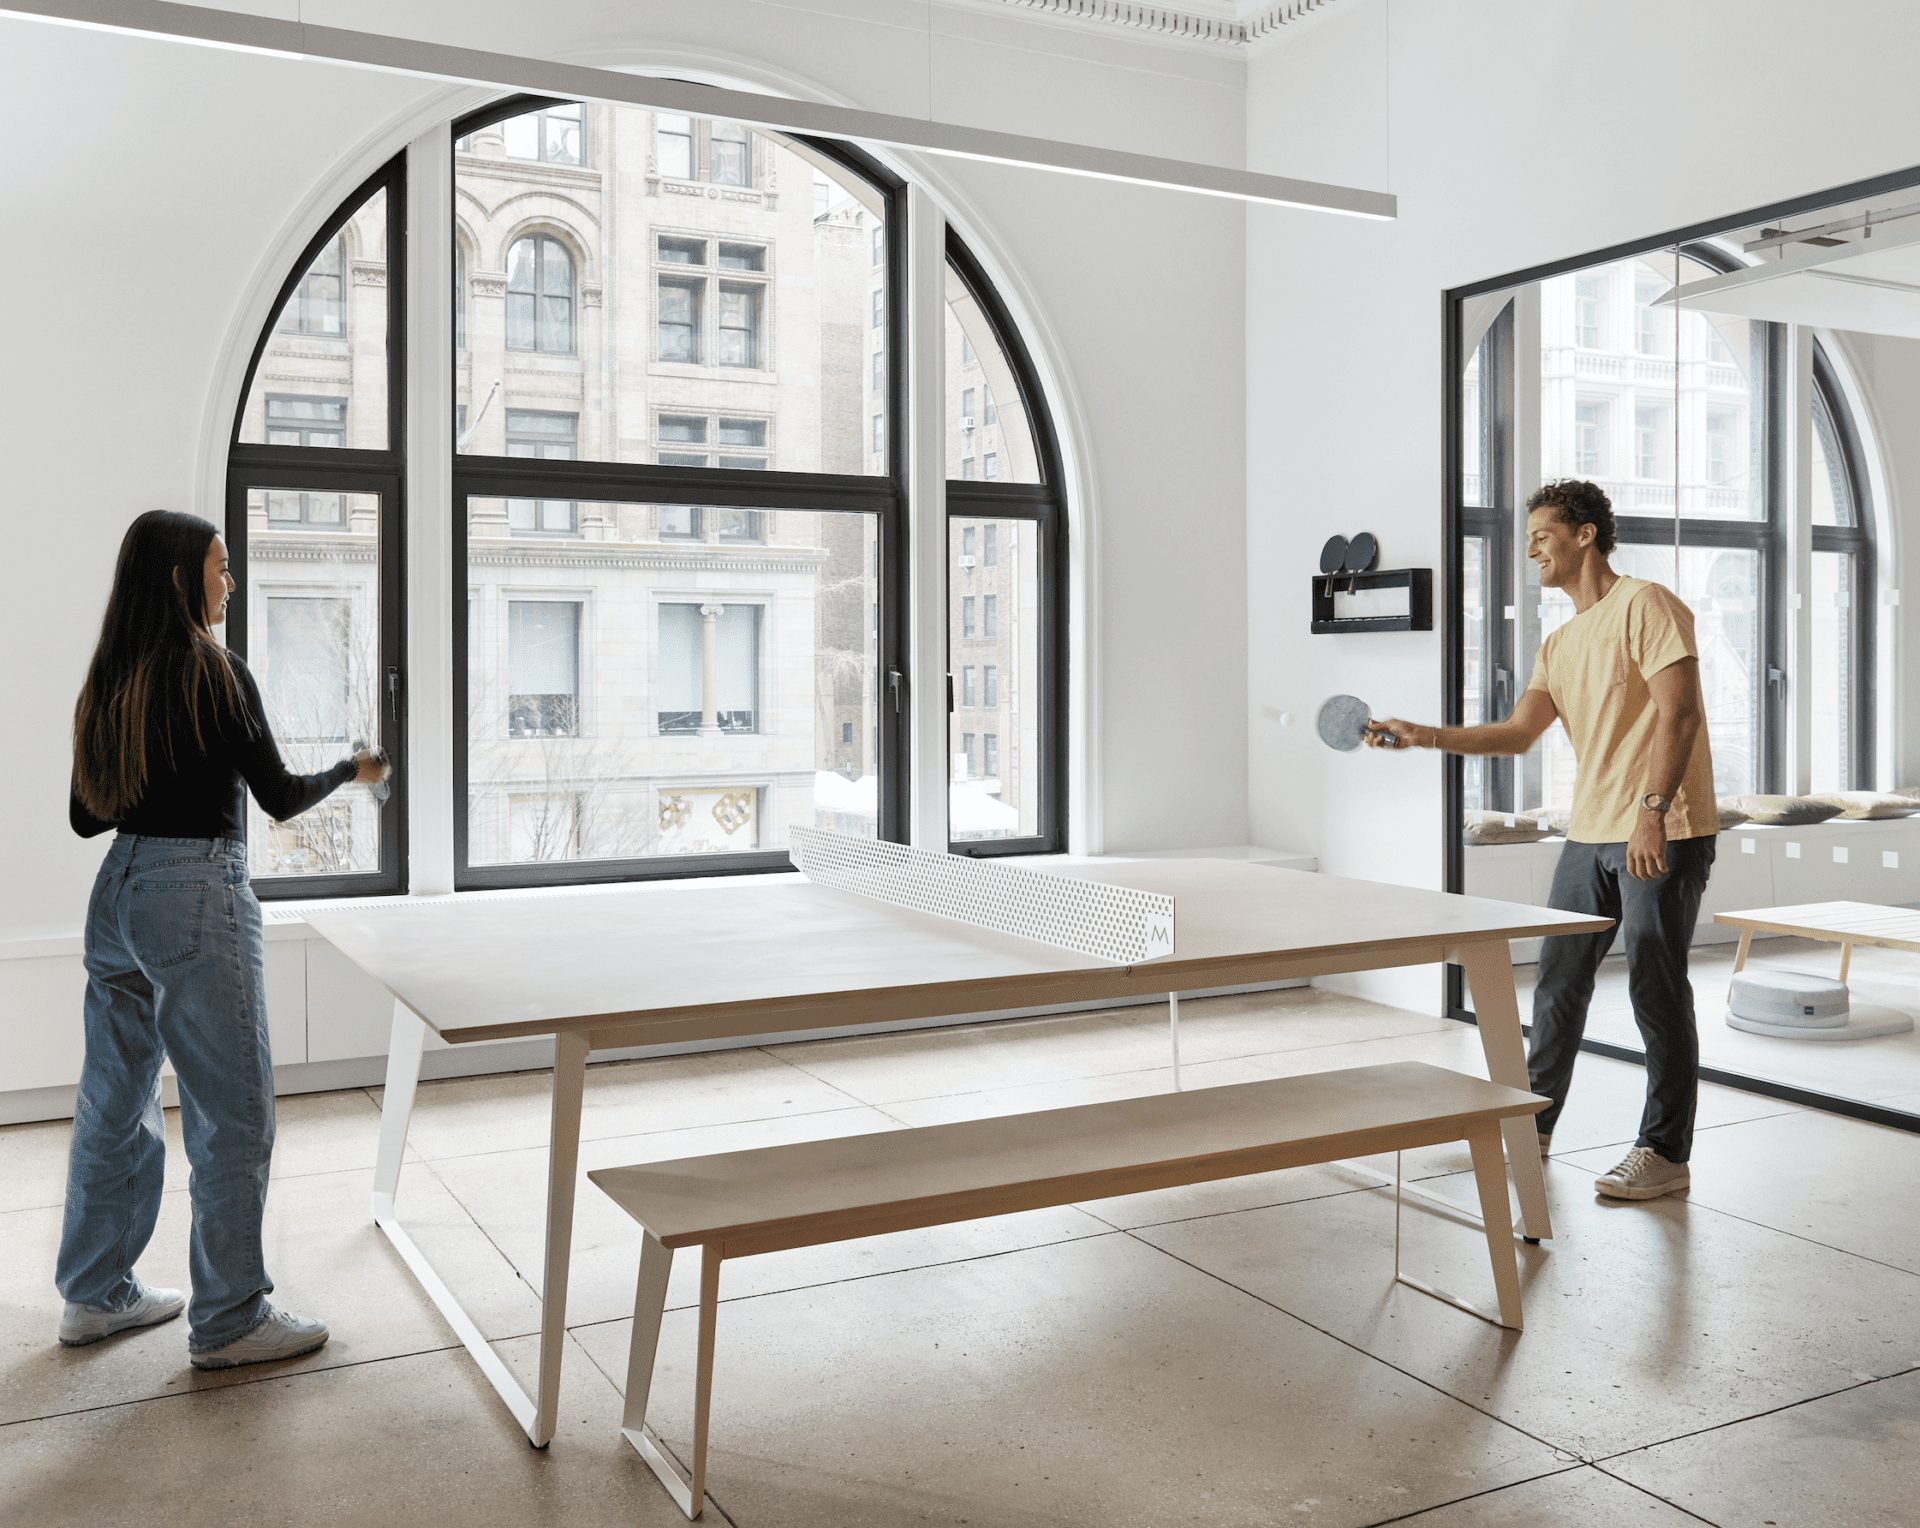 employee wellbeing, health and wellbeing, new york, office design, office interior, OnOffice magazine